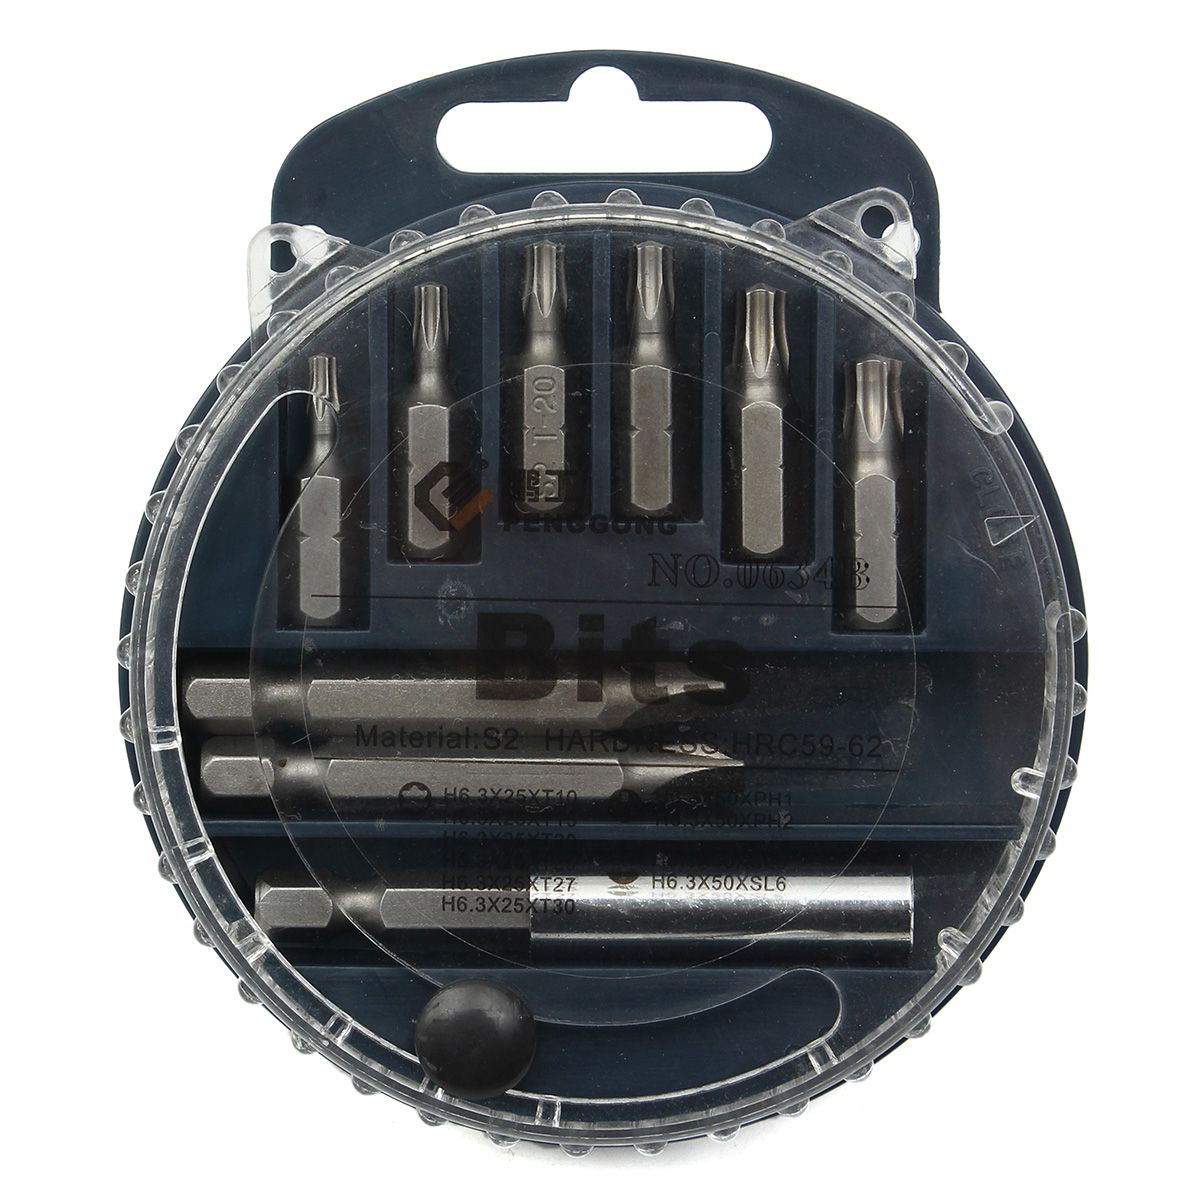 PENGGOOG-0634-11Pcs-Magnetic-Screwdriver-Bits-Slotted-Phillips-Torx-S2-Alloy-Steel-H6-Electric-Screw-1147177